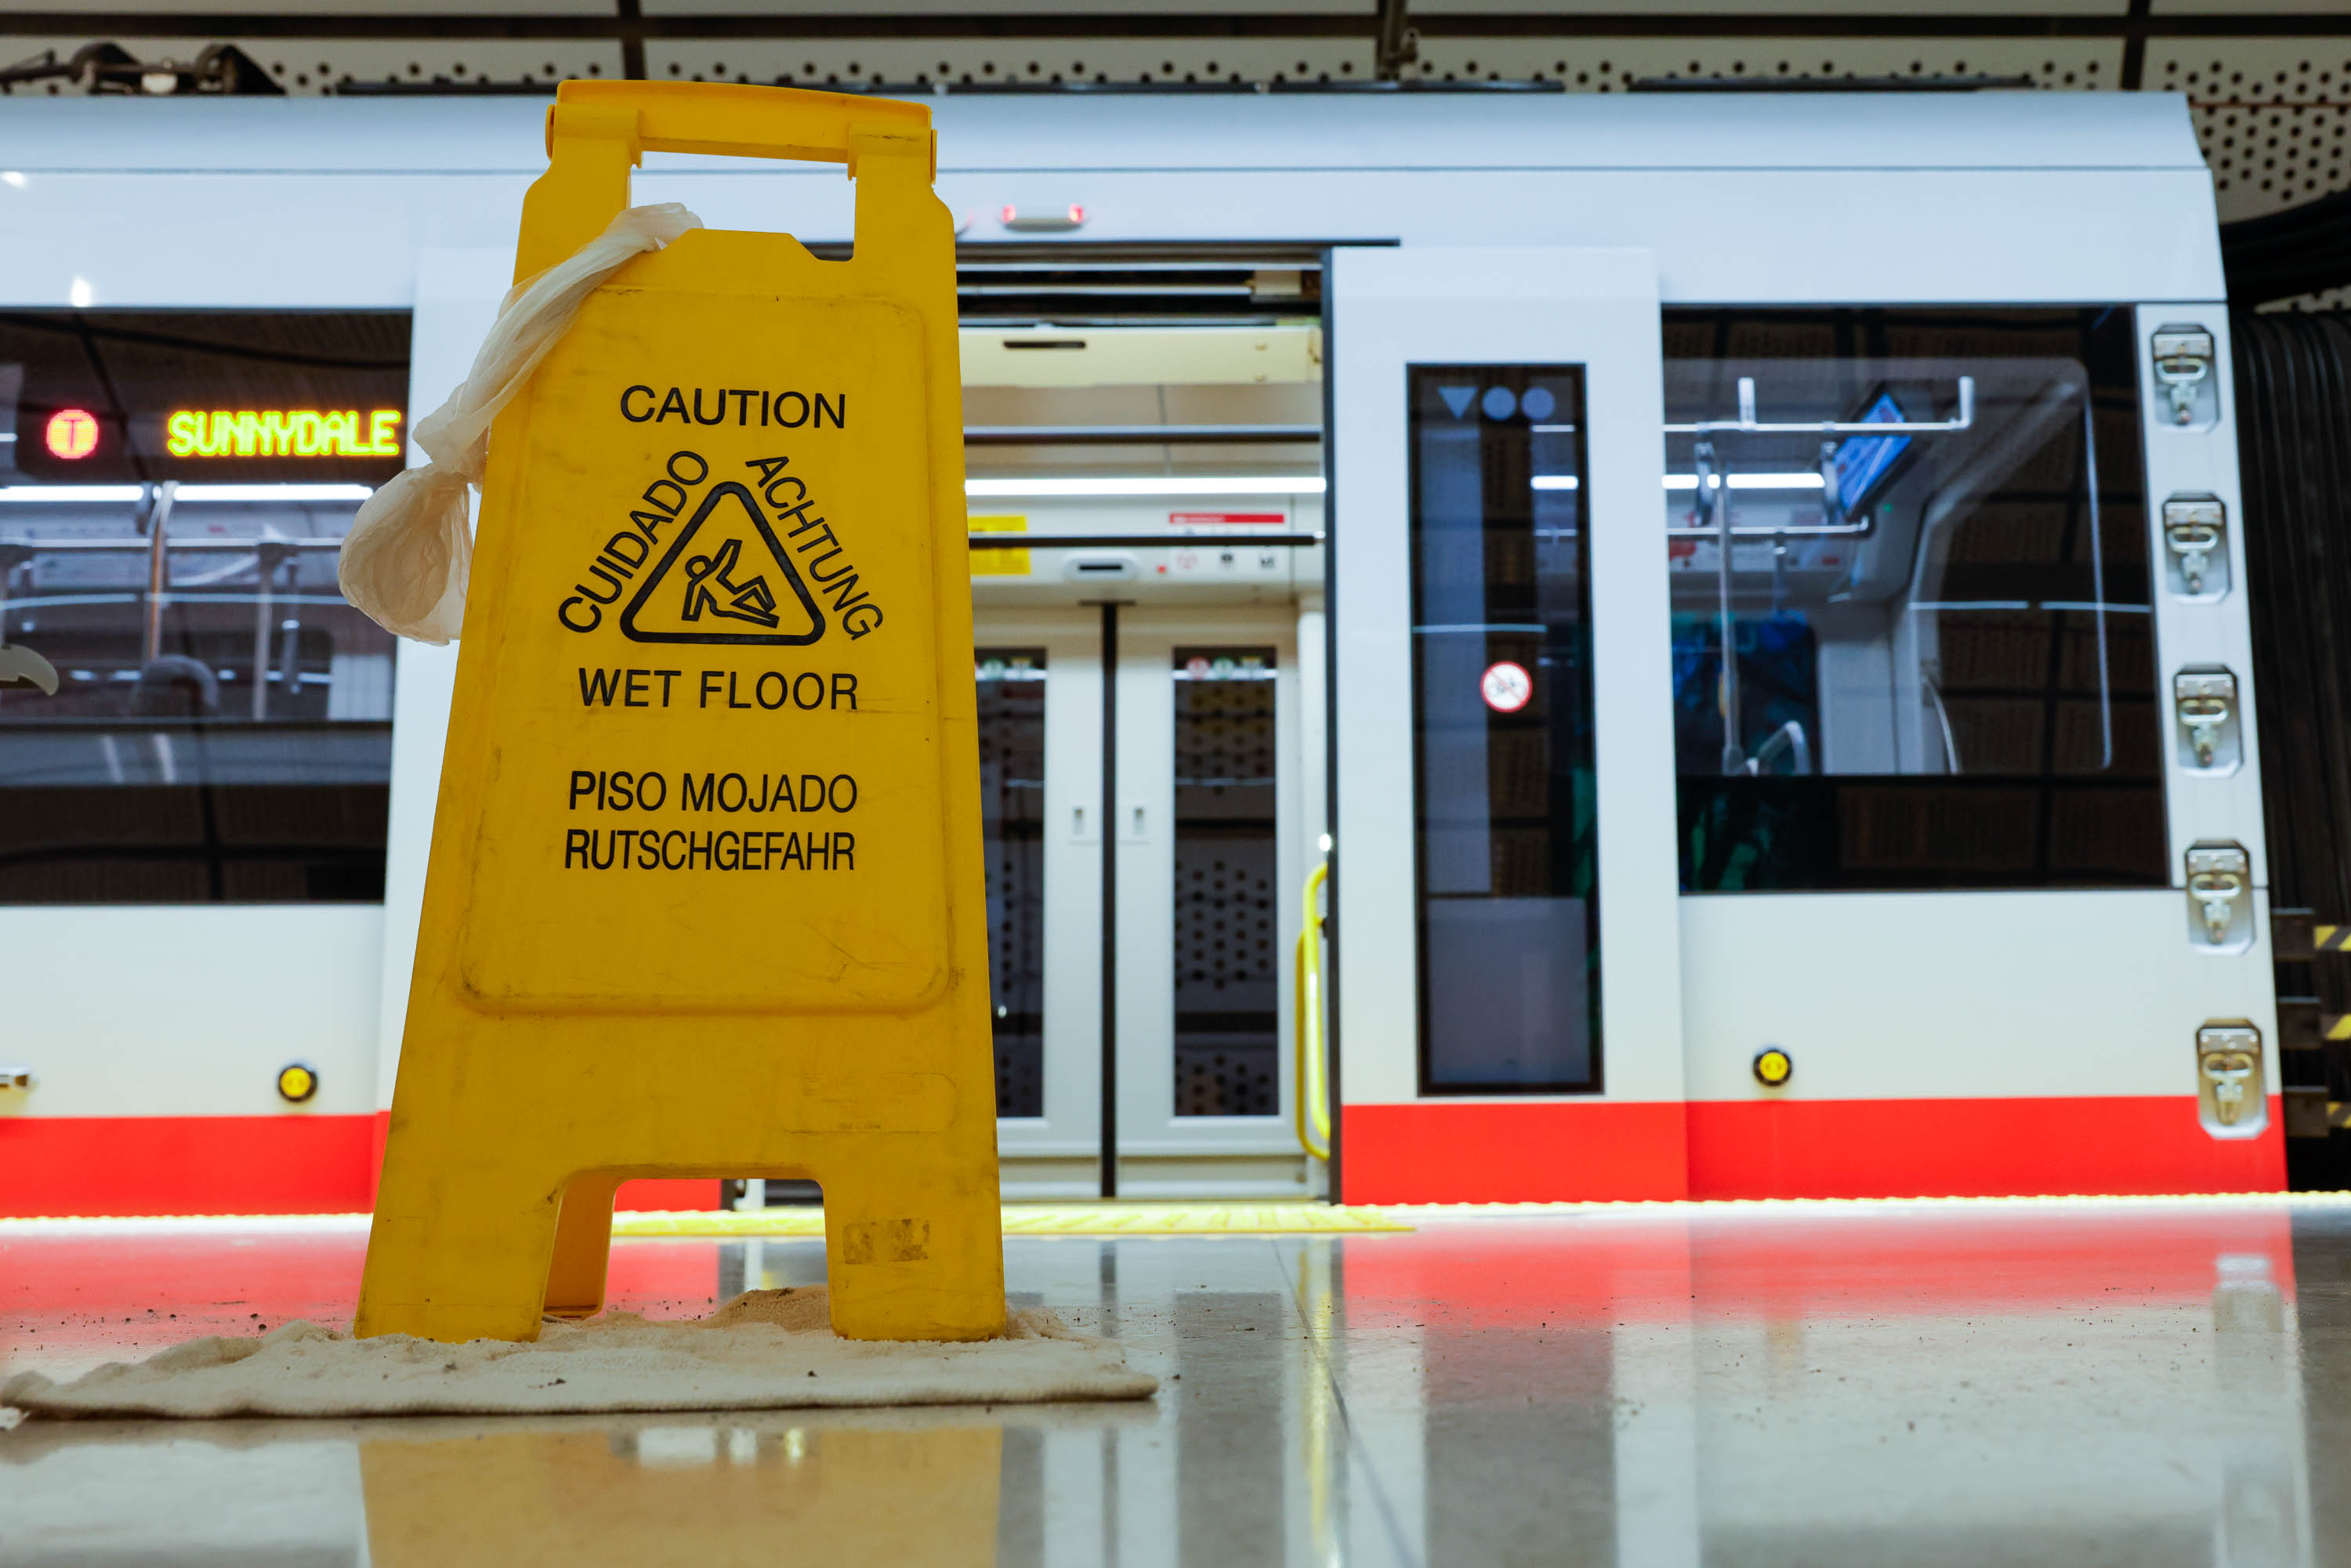 A &quot;Wet Floor&quot; sign in a train station foreground with a train in the background.